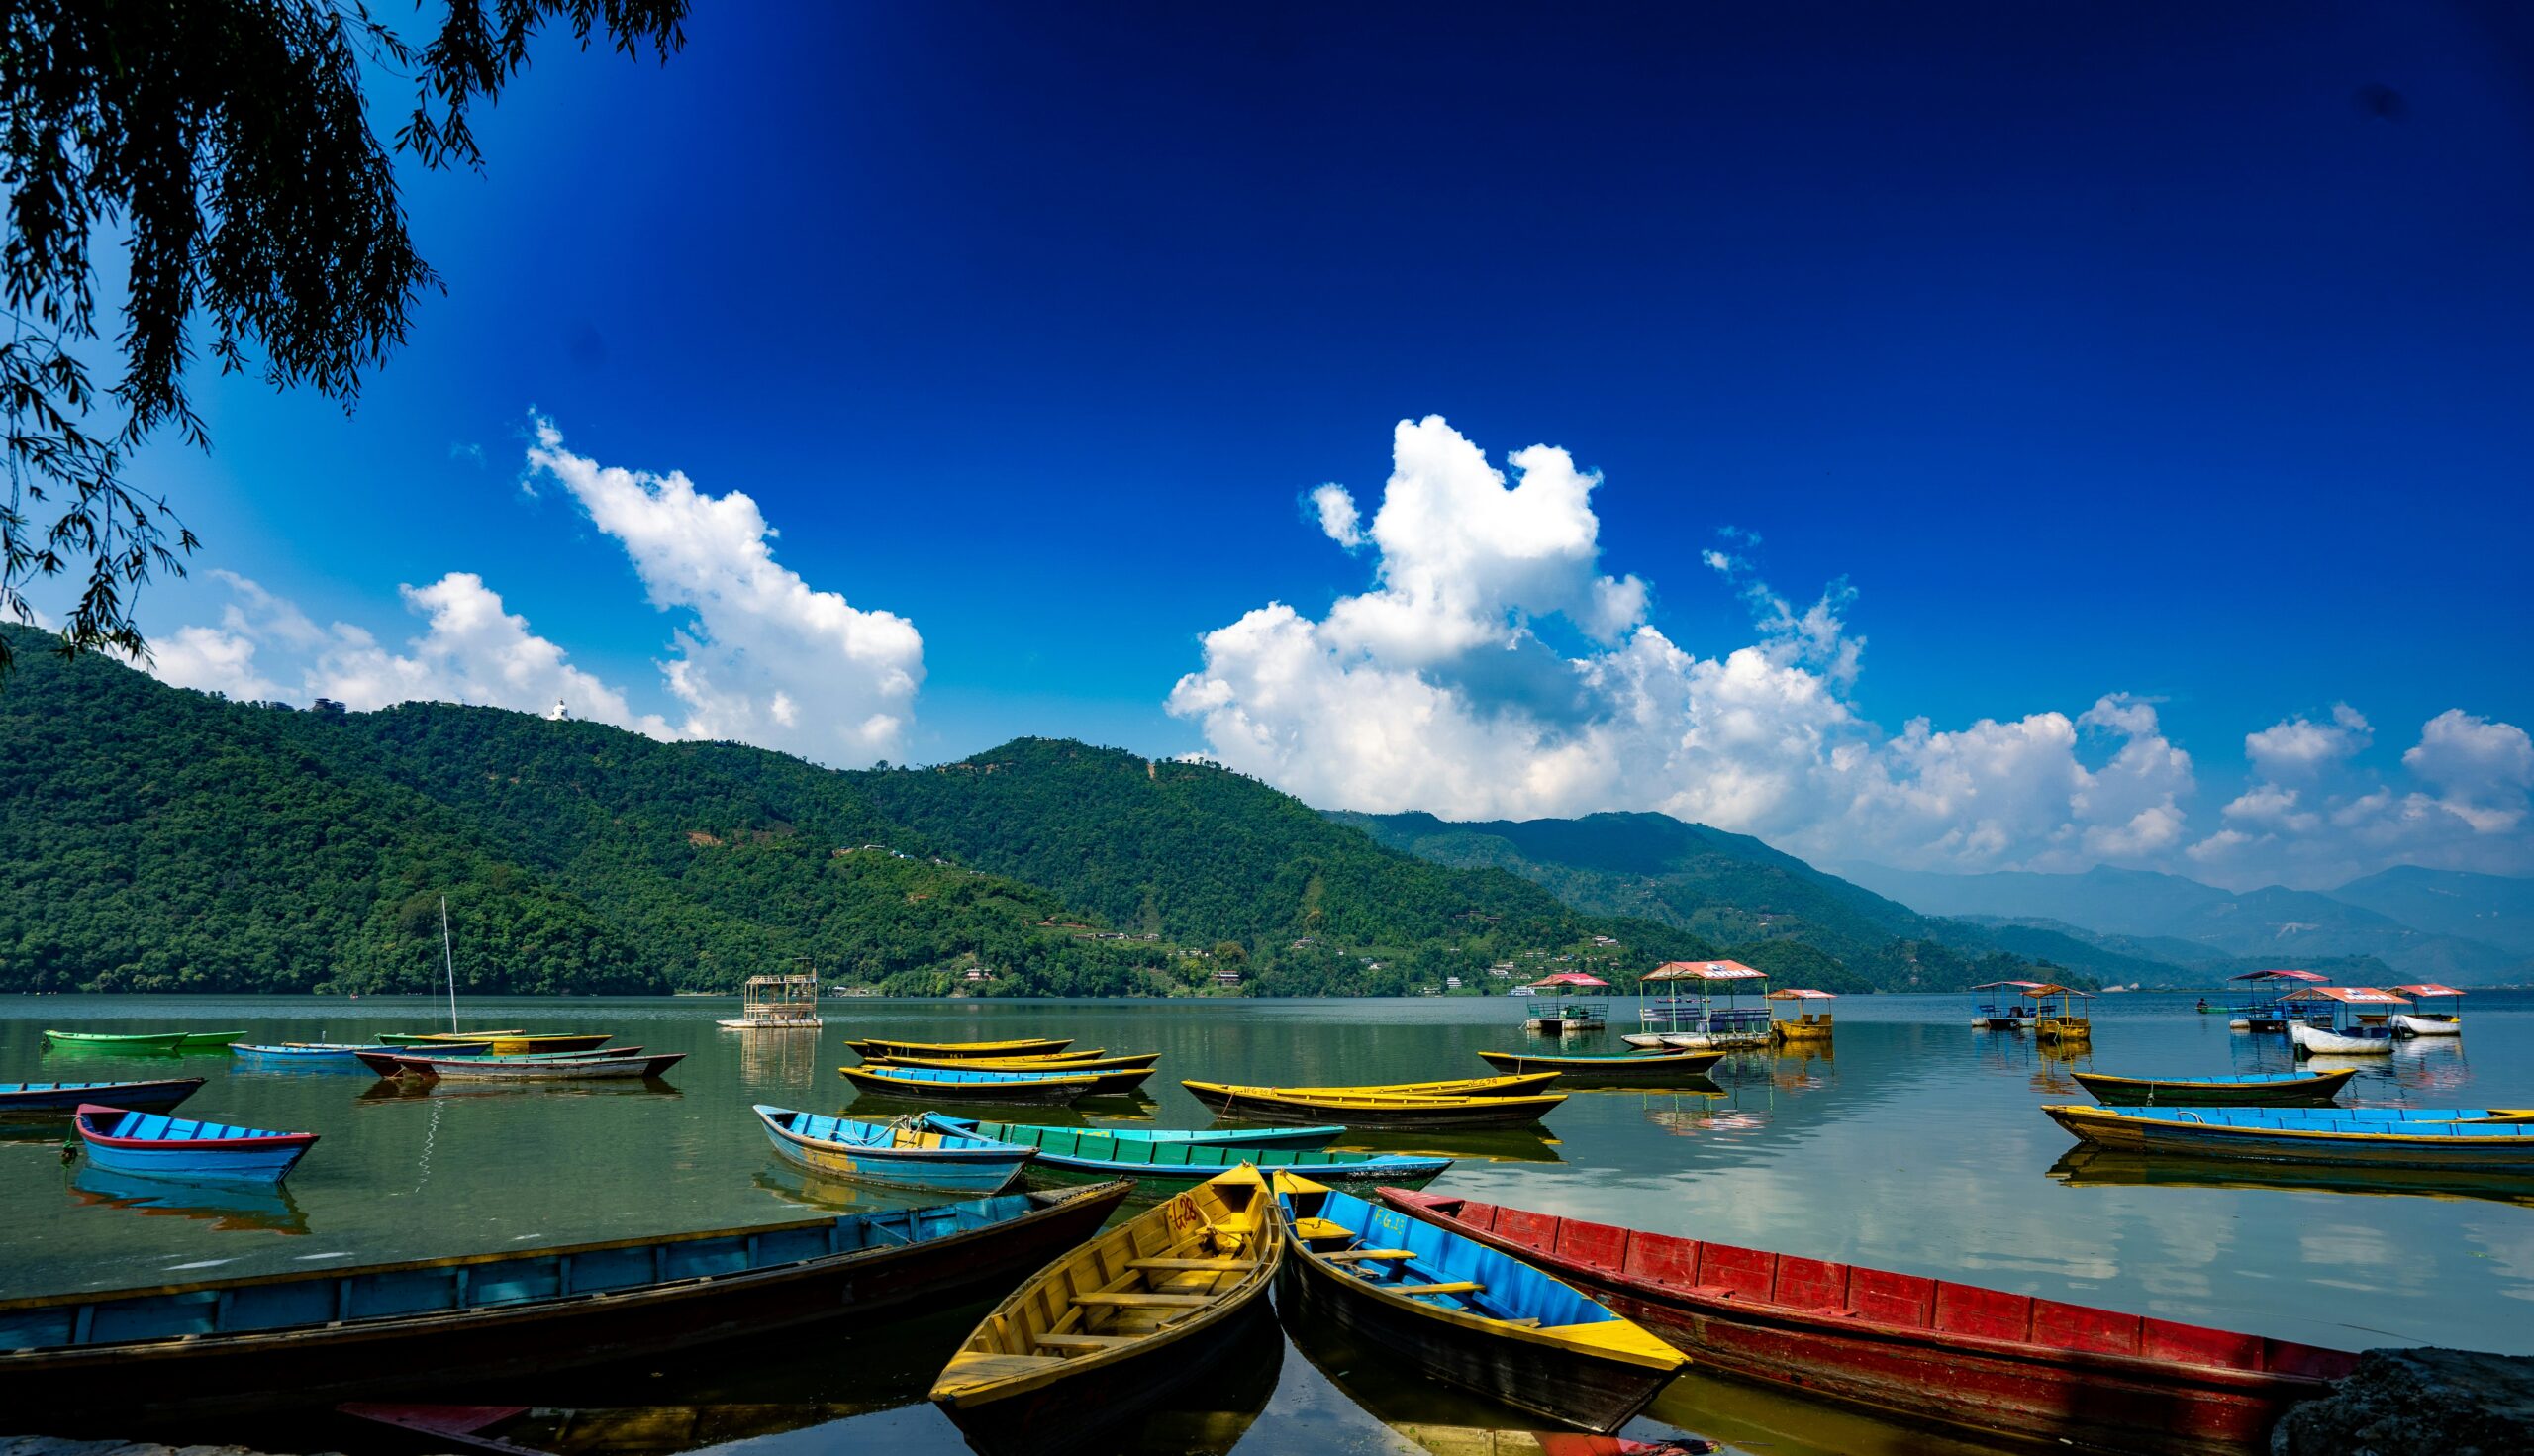 Pame Pokhara Delights: Exploring Street Ambiance and Lakeside Bliss